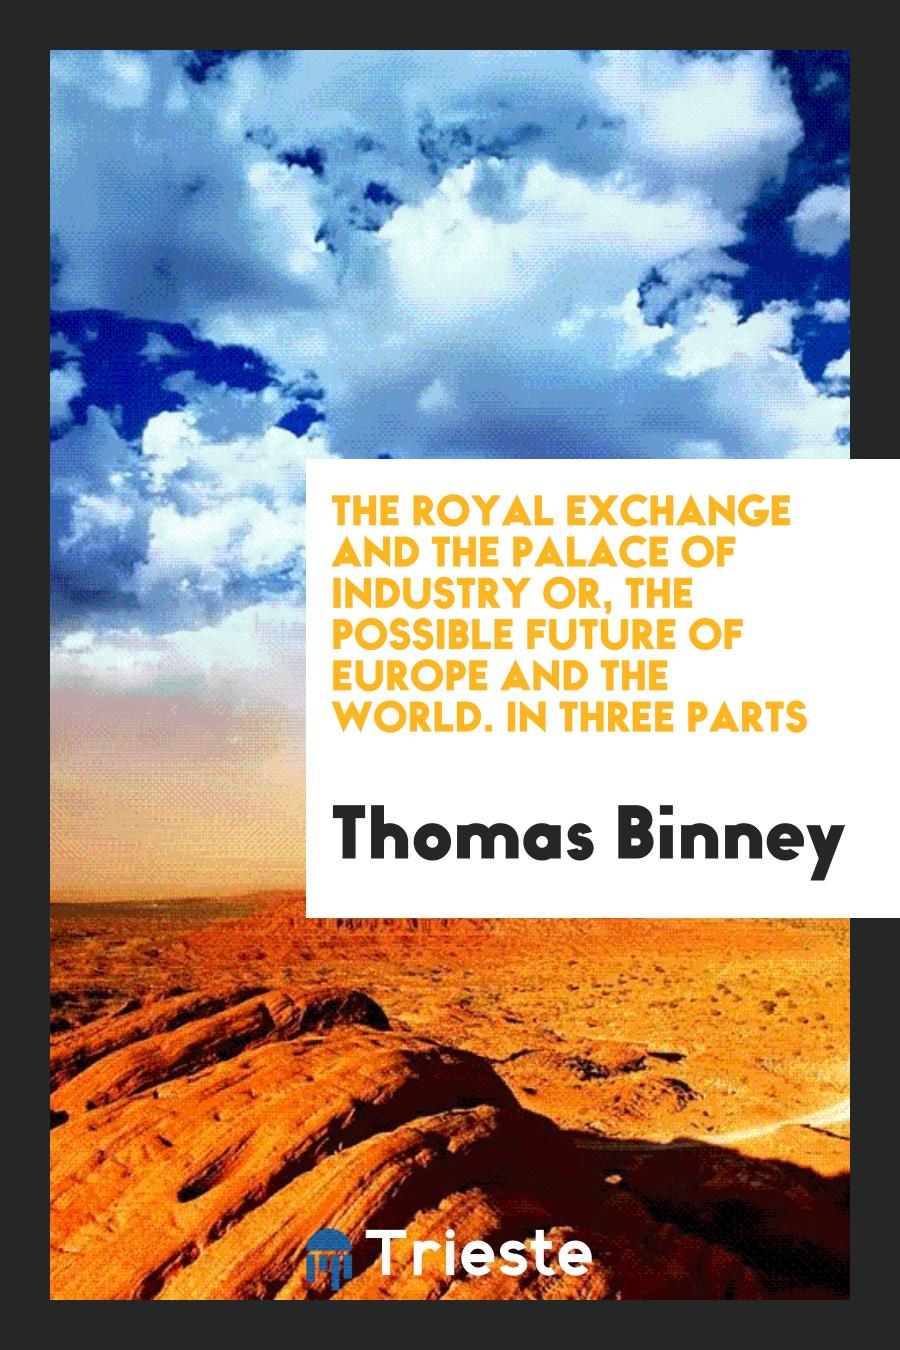 The Royal Exchange and the Palace of Industry Or, the Possible Future of Europe and the World. In Three Parts